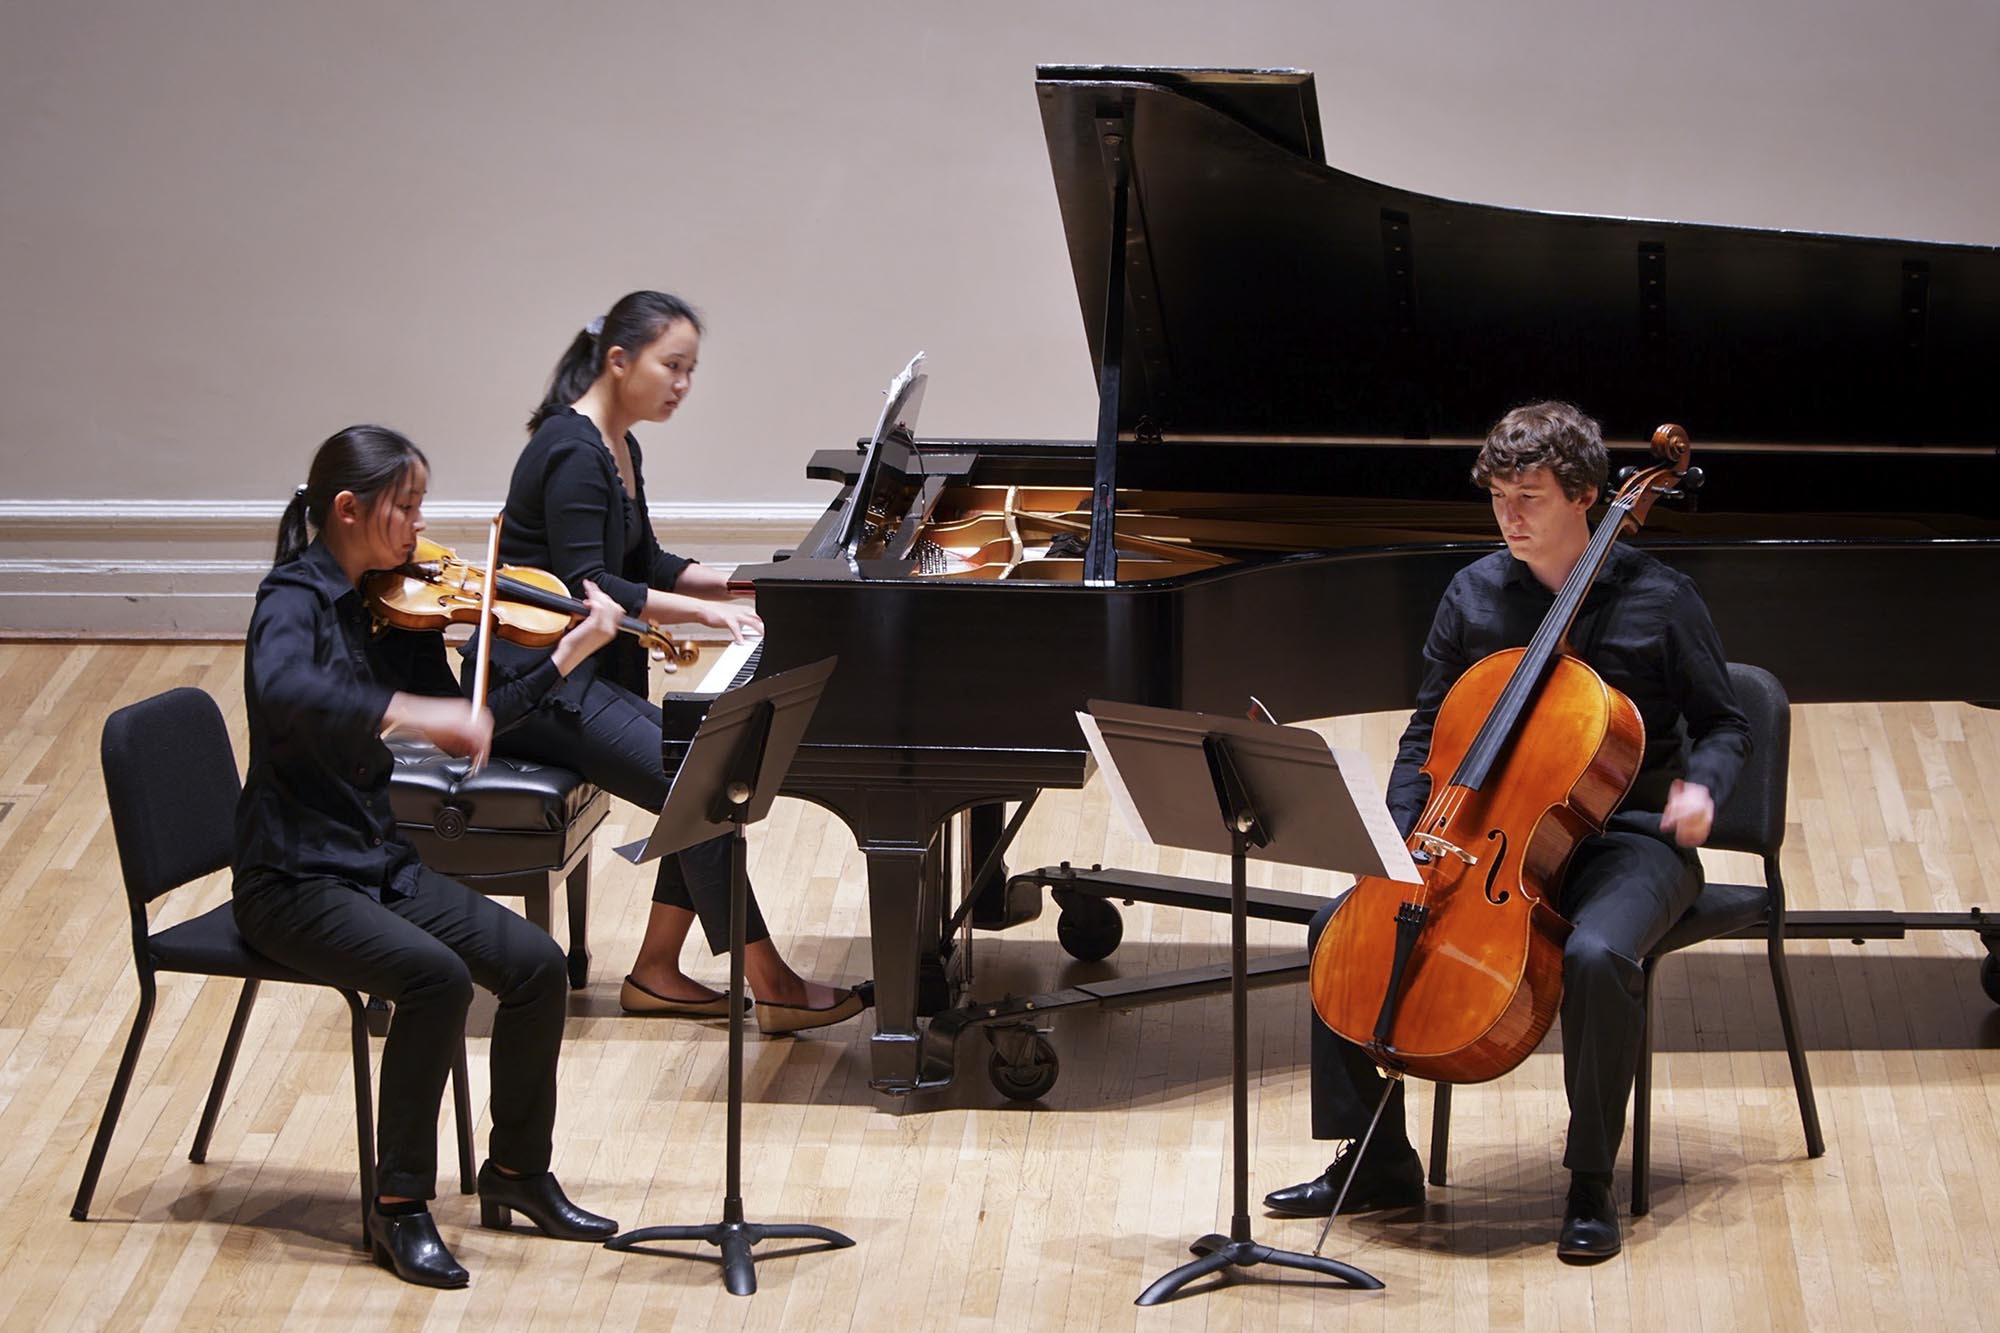 Sophia Park, Anna Wang and Brent Davis  play their musical instruments on a stage